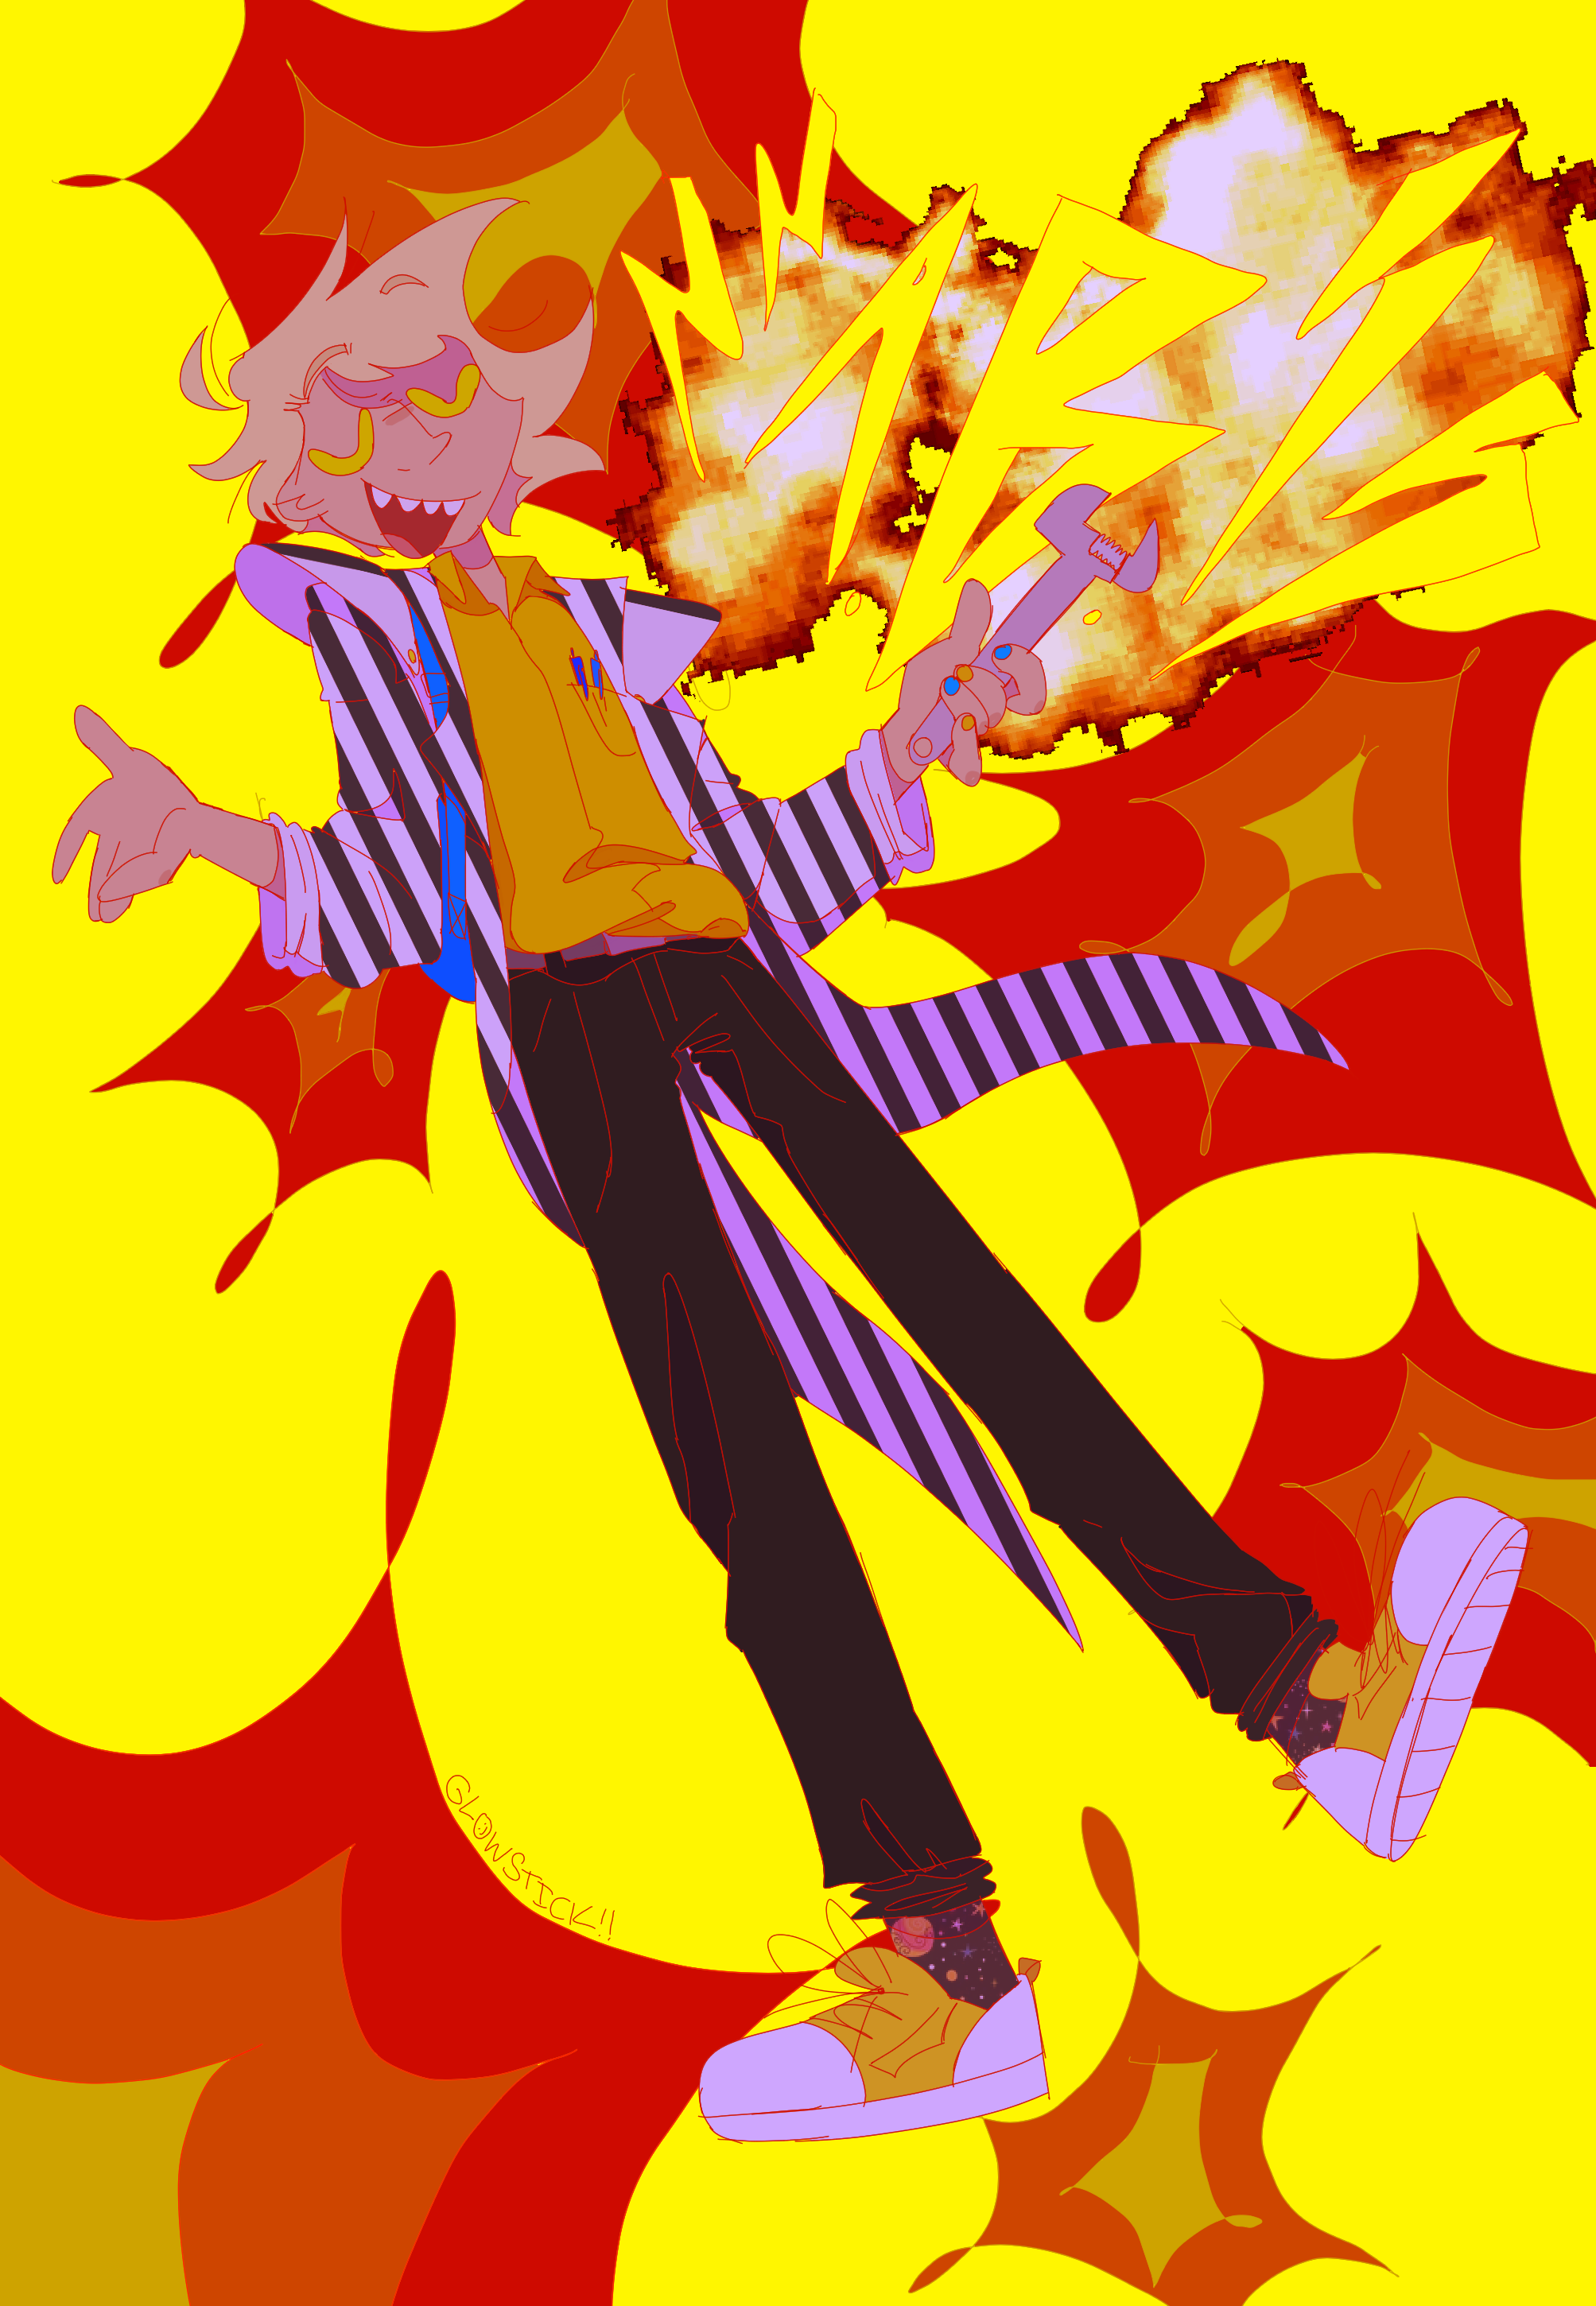 A drawing of a light-skinned child with medium-length blonde hair. He is wearing a black and white striped tailcoat, a yellow dress shirt, black pants, and yellow tennis shoes. He holds a wrench in one hand and is shrugging in a relaxed, careless manner. The background is made up of explosions, both drawn and photorealistic, on a yellow color block. The image has yellow bubble letters on it that read 'AB!' and has lighting bolts drawn around word.